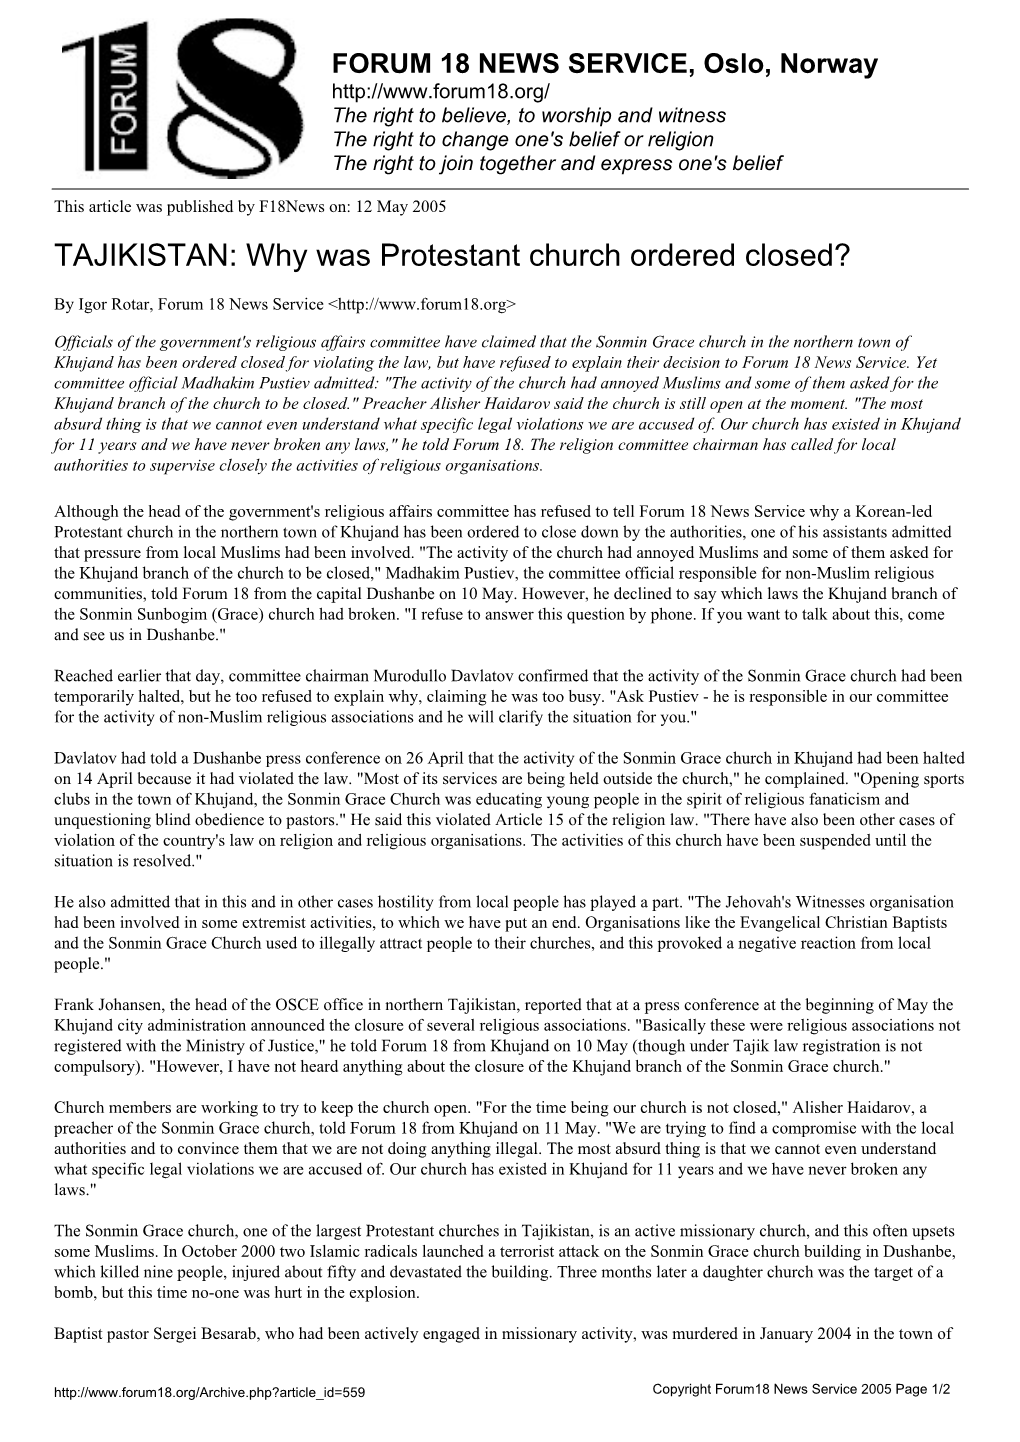 TAJIKISTAN: Why Was Protestant Church Ordered Closed?